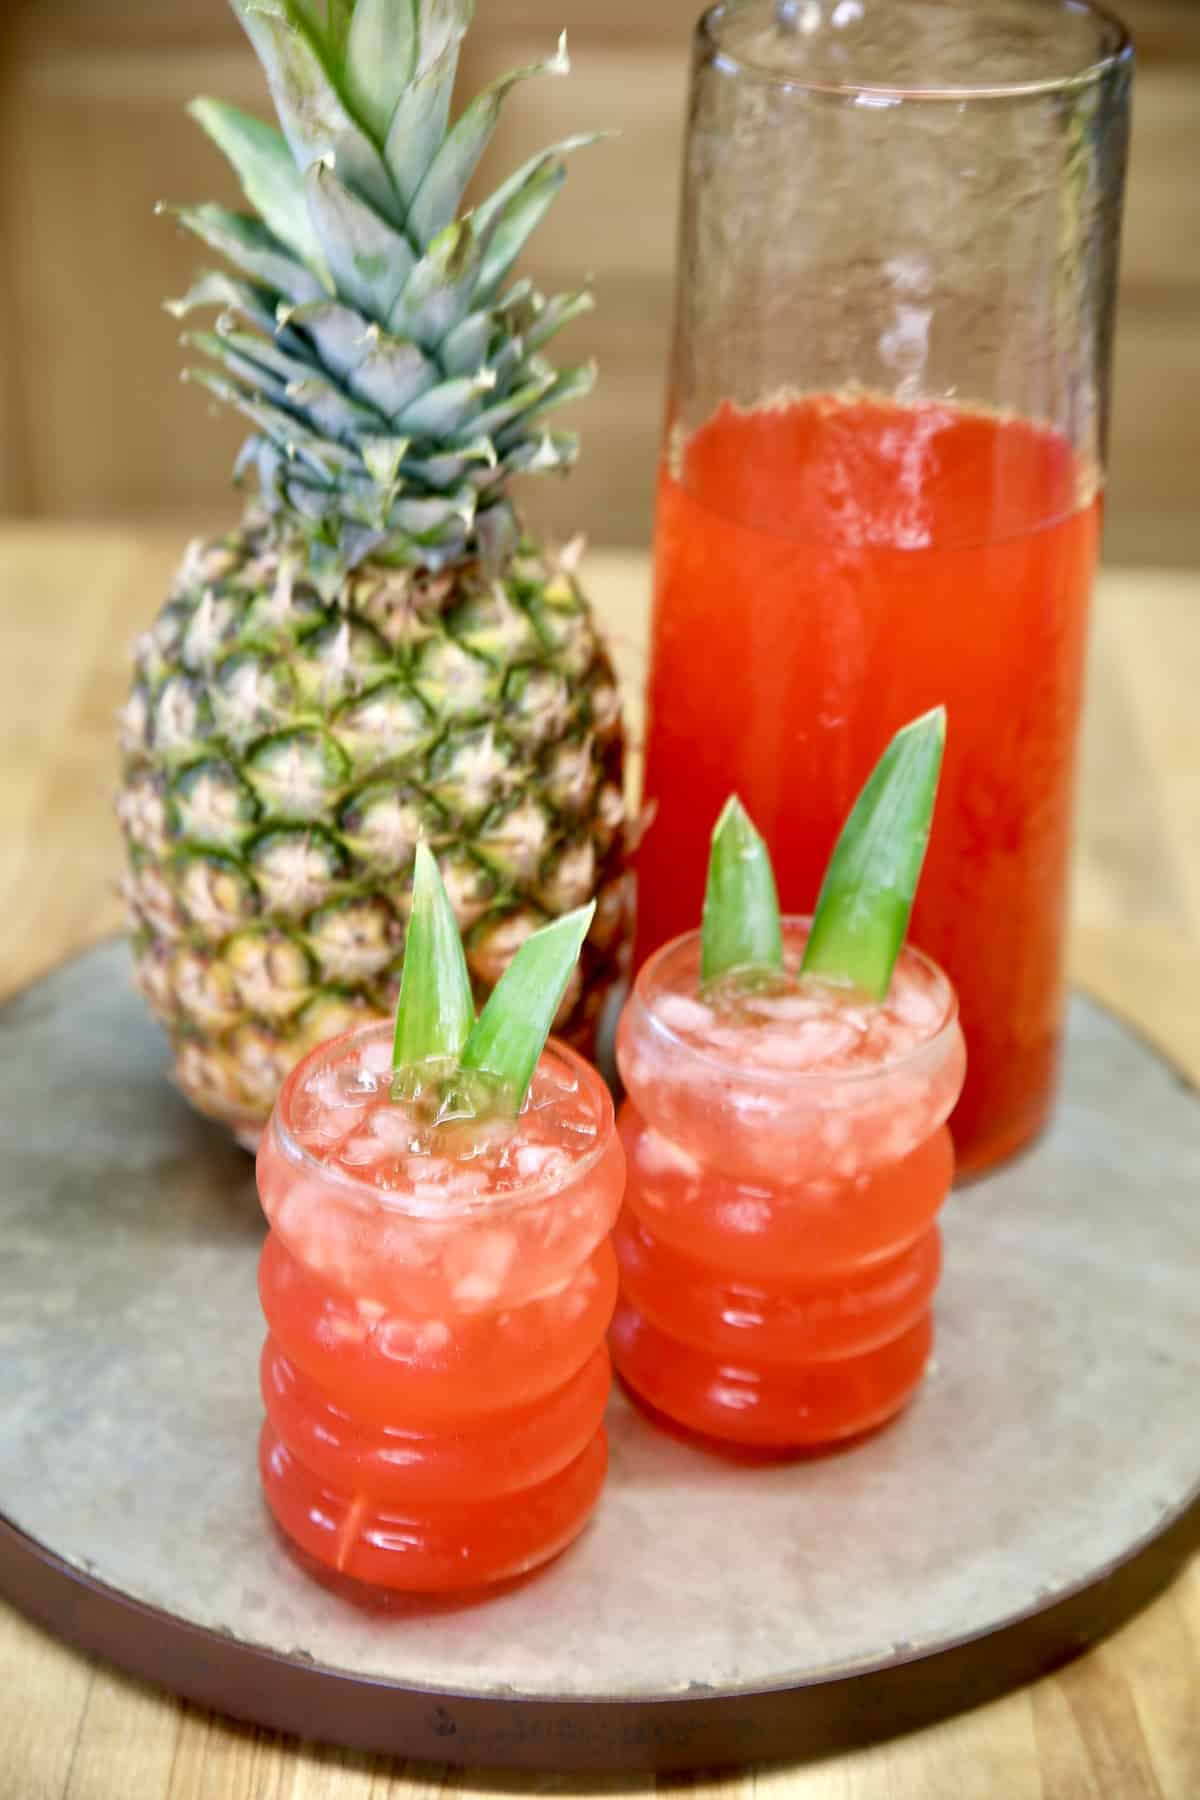 Pineapple, pitcher of punch, 2 glasses of punch.